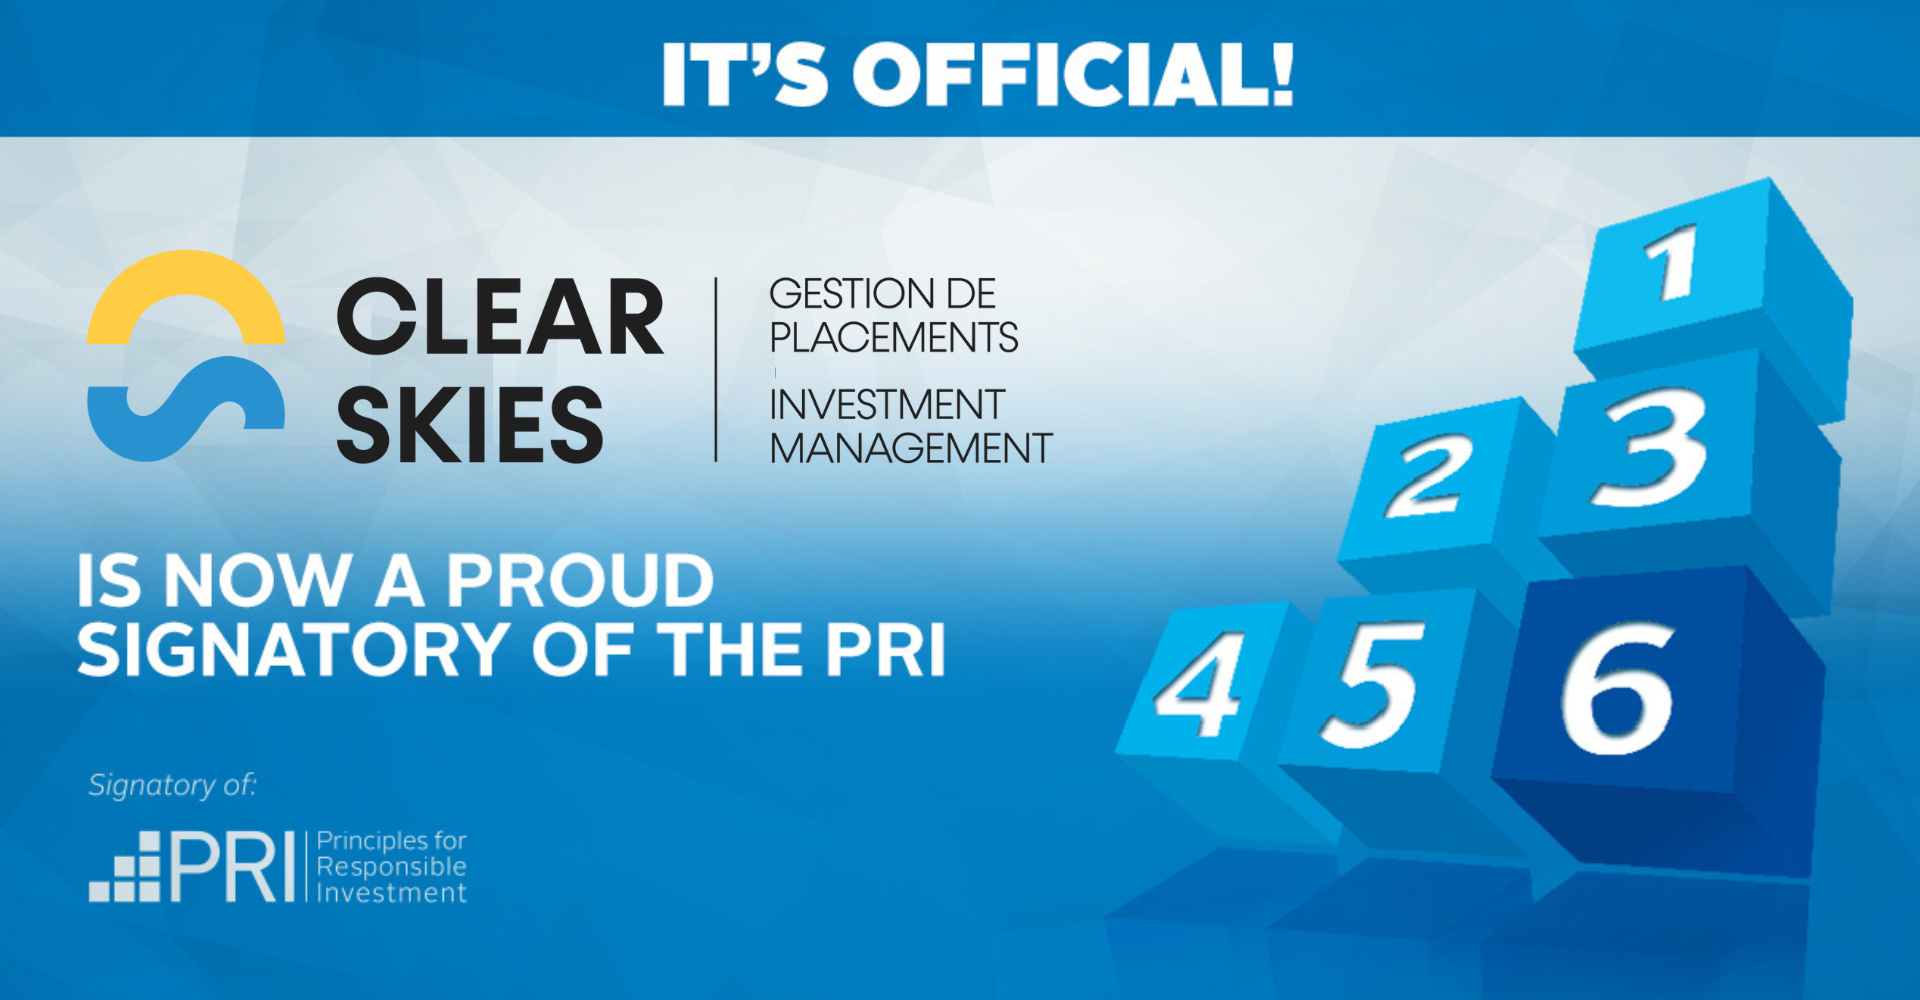 Clear Skies Becomes a Signatory of the PRI